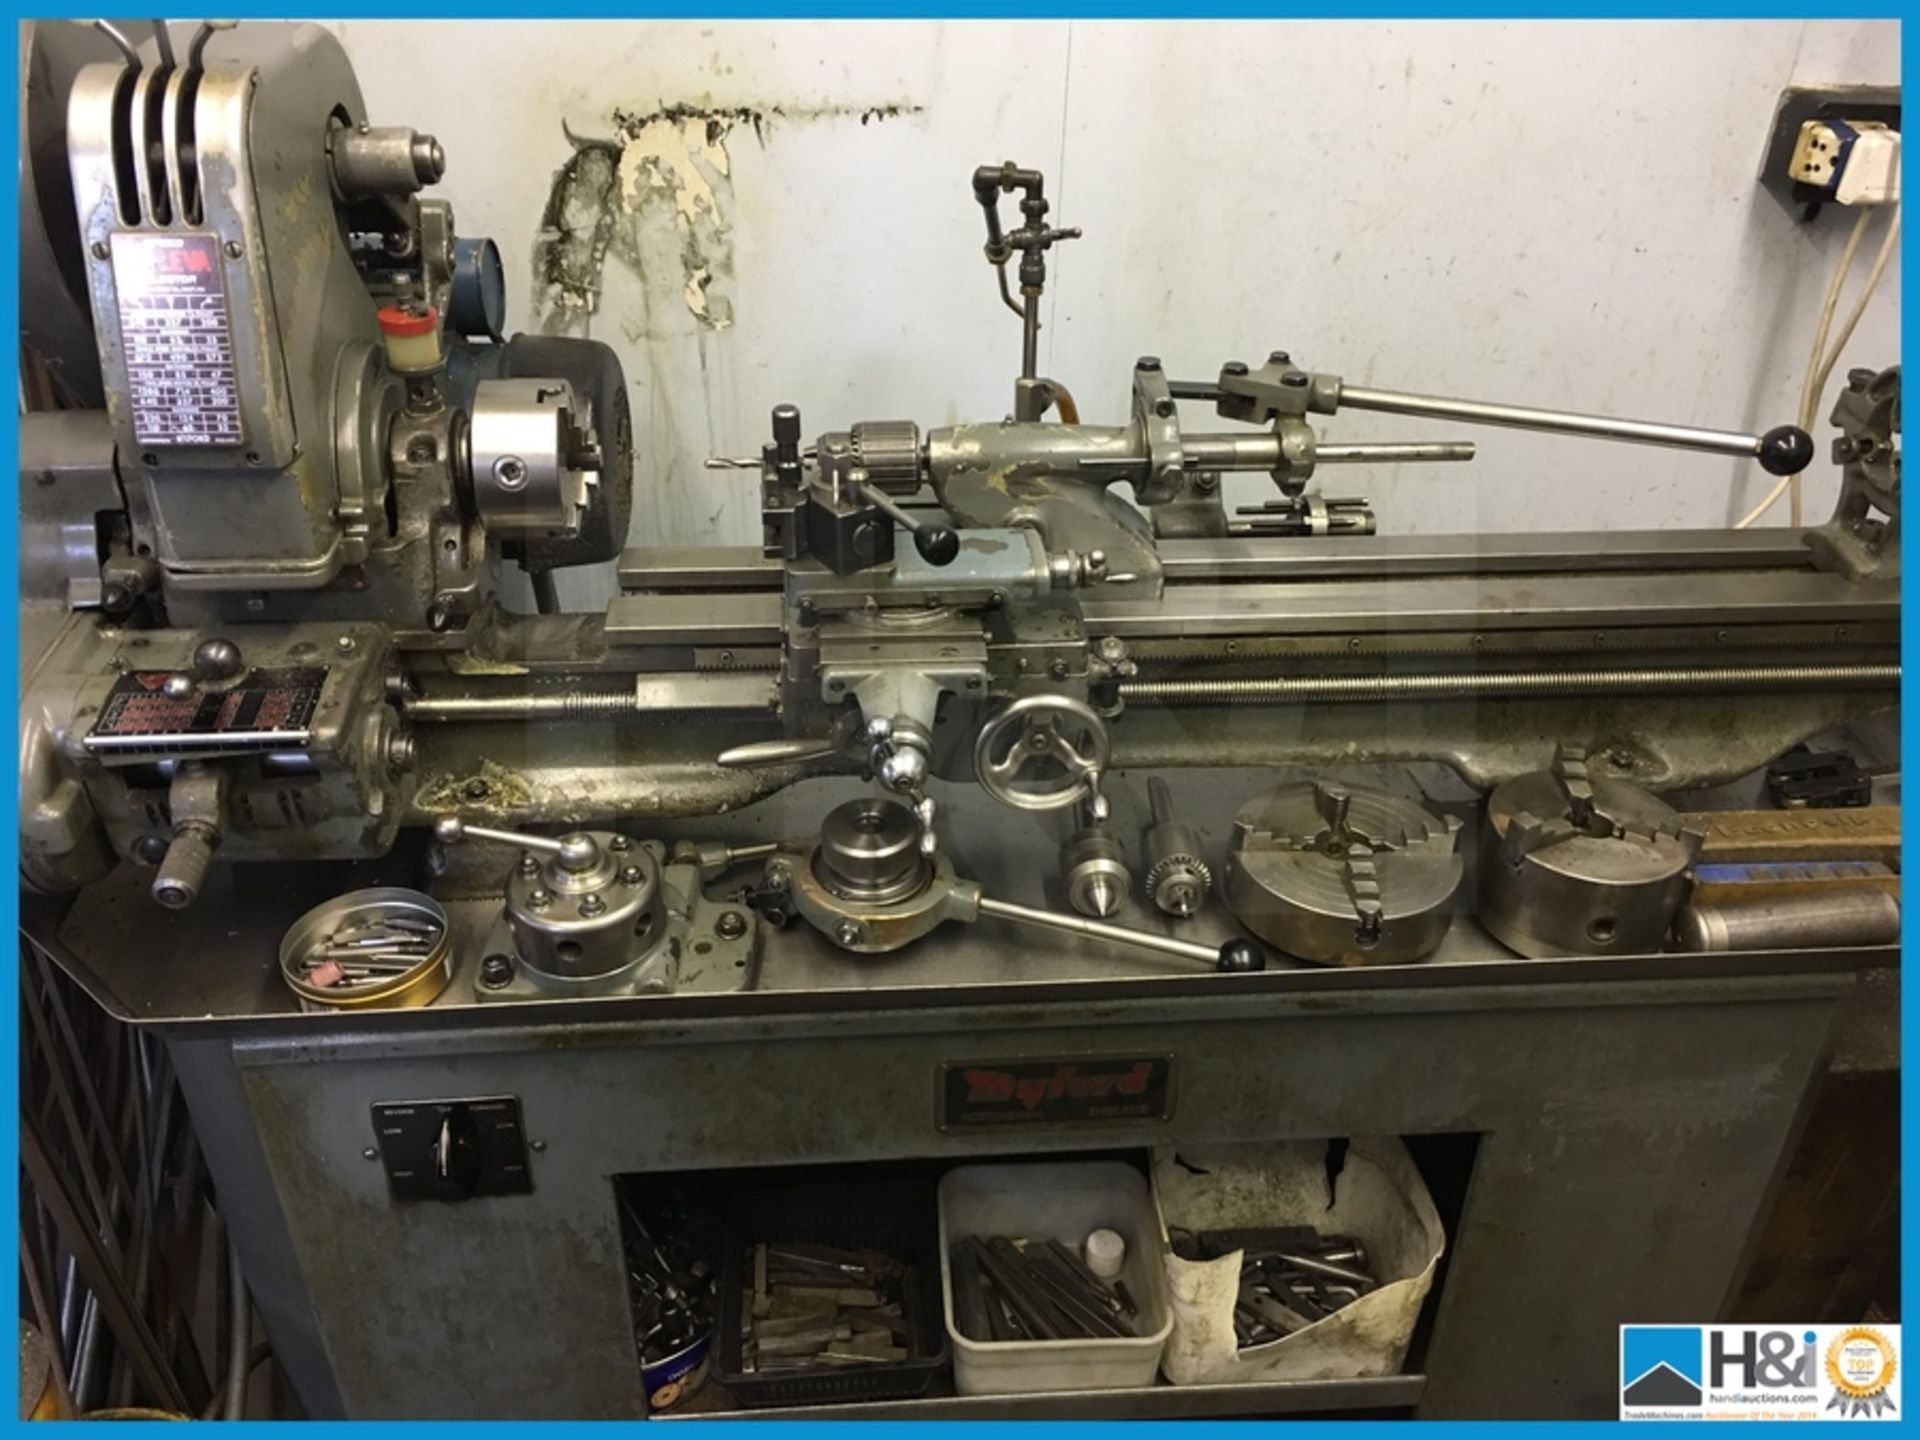 A Myford ML7 Single phase engineers lathe, surely one of the finest examples of this model offered